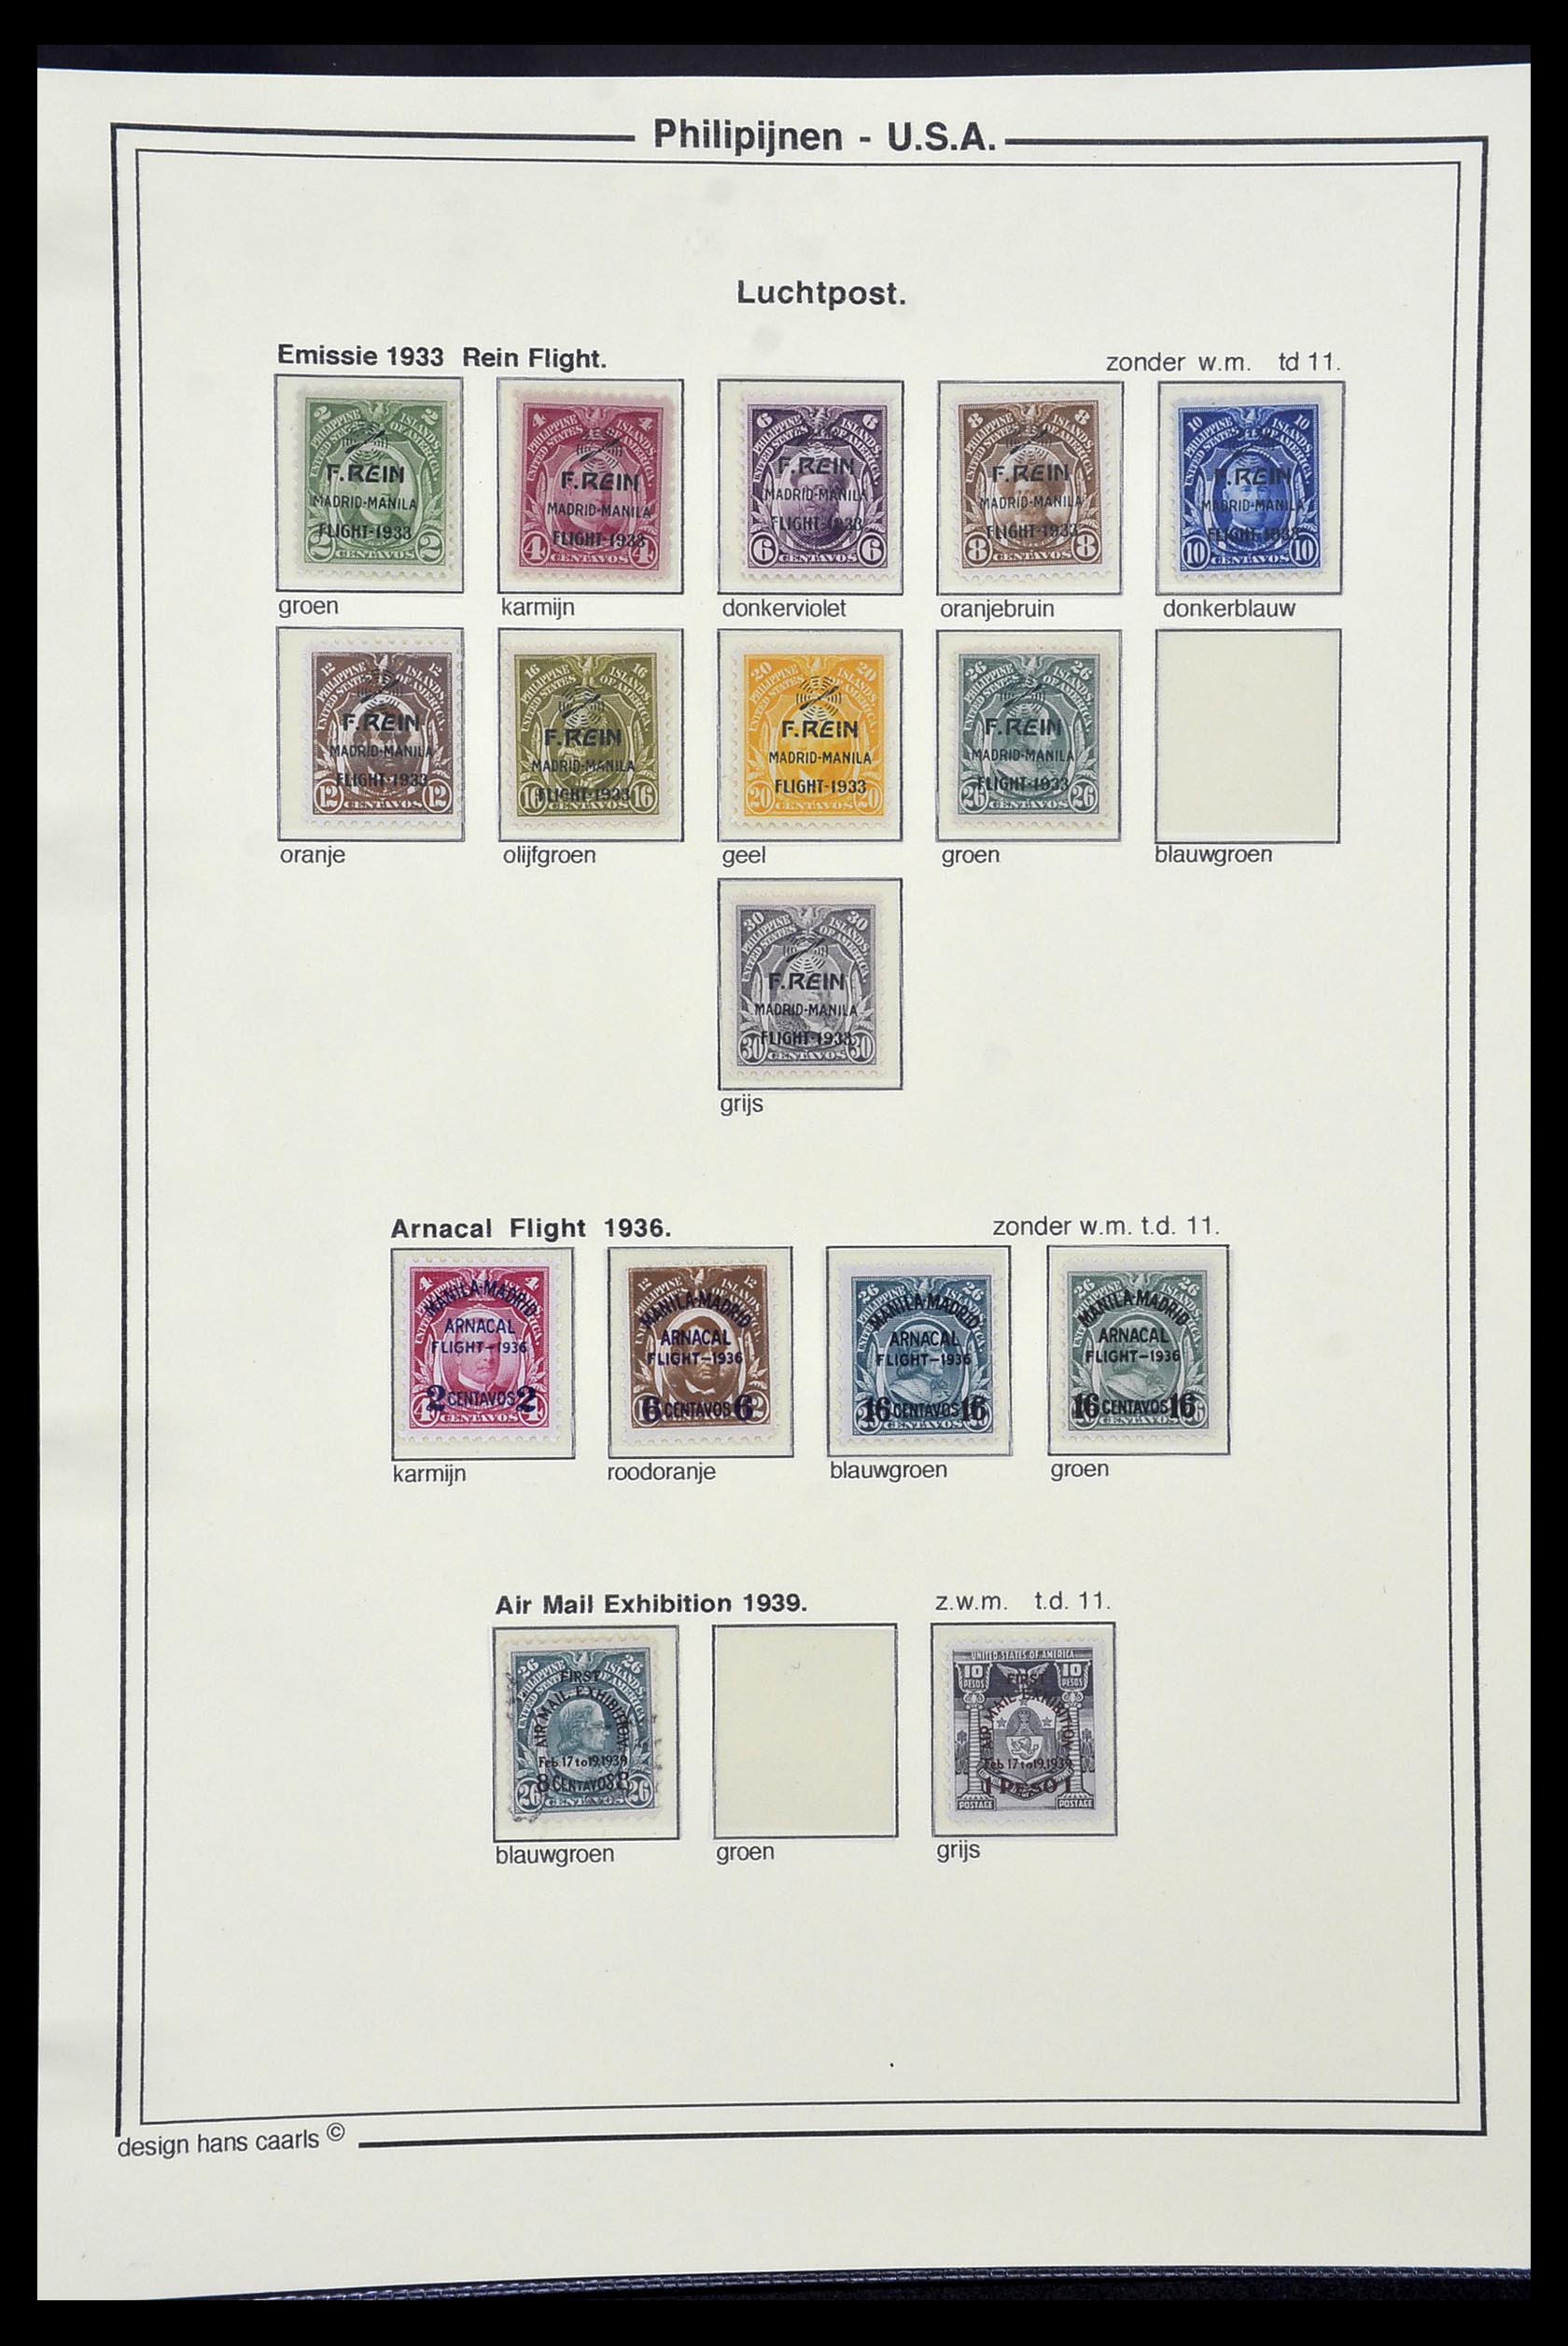 34530 019 - Stamp Collection 34530 Philippines 1899-1944.